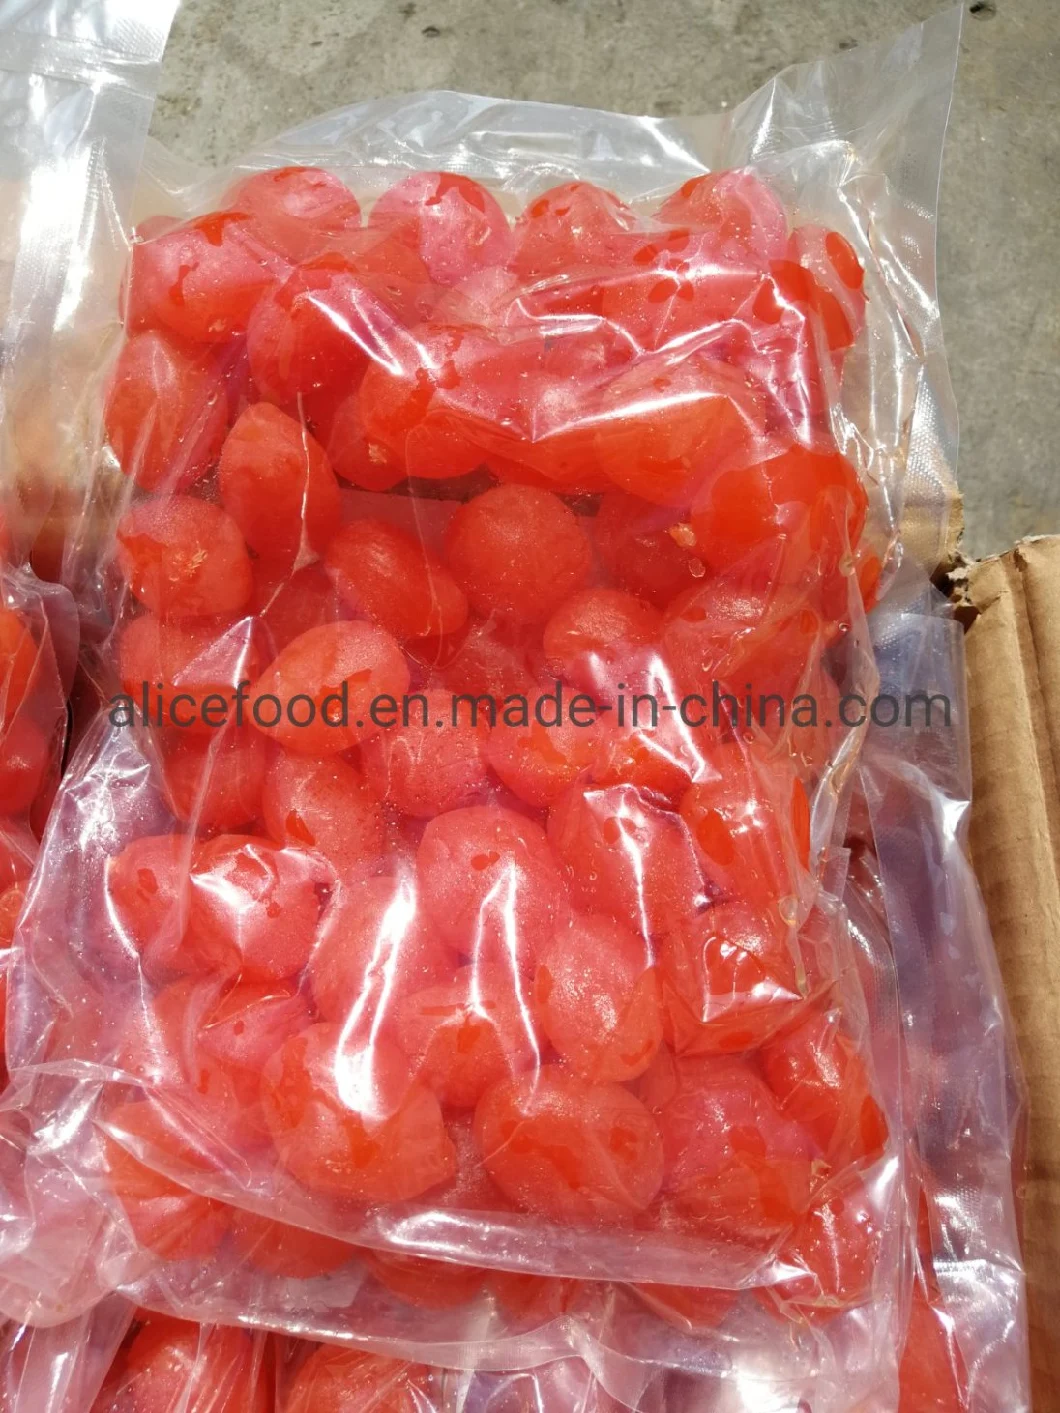 Wholesale Dried Fruits Preserved Fruits New Crop High Moisture Dried Small Peach